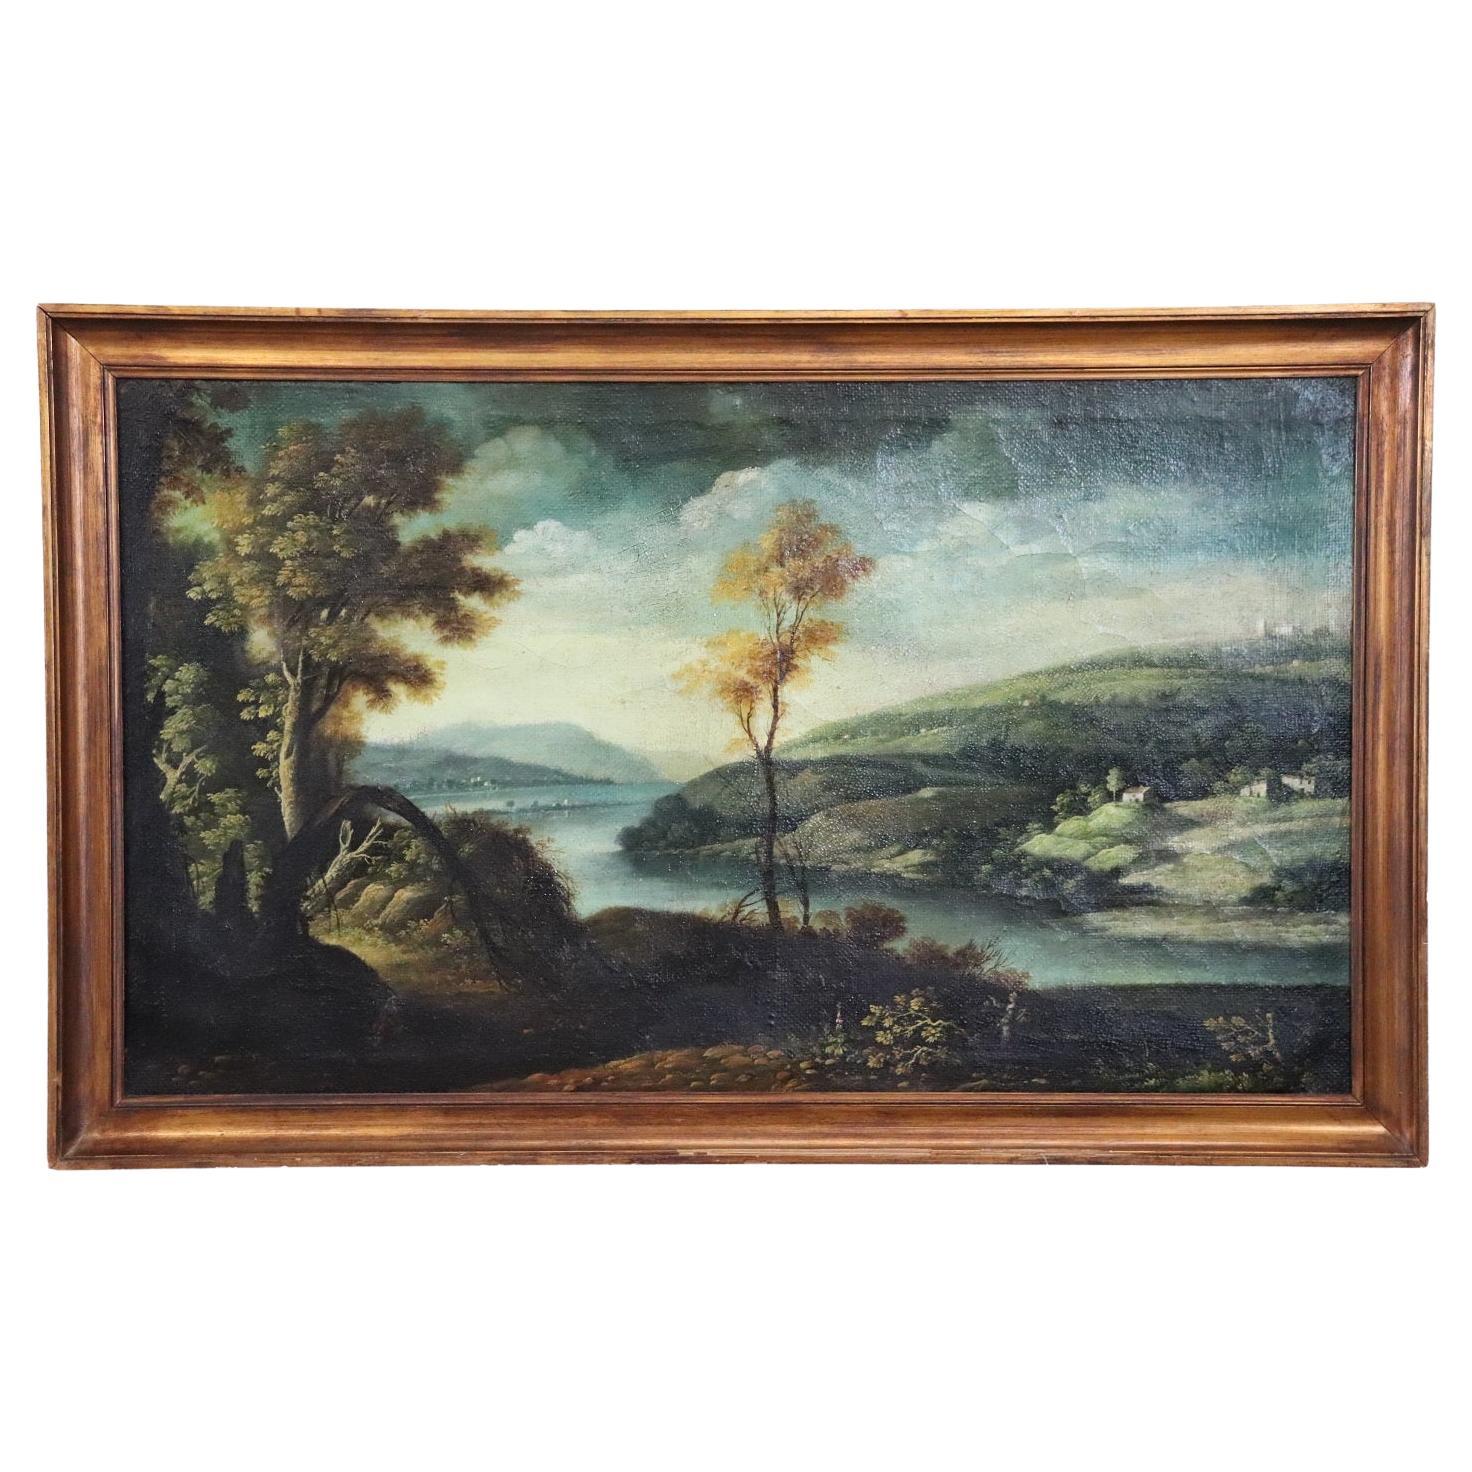 Italian Oil Painting on Canvas Landscape with River